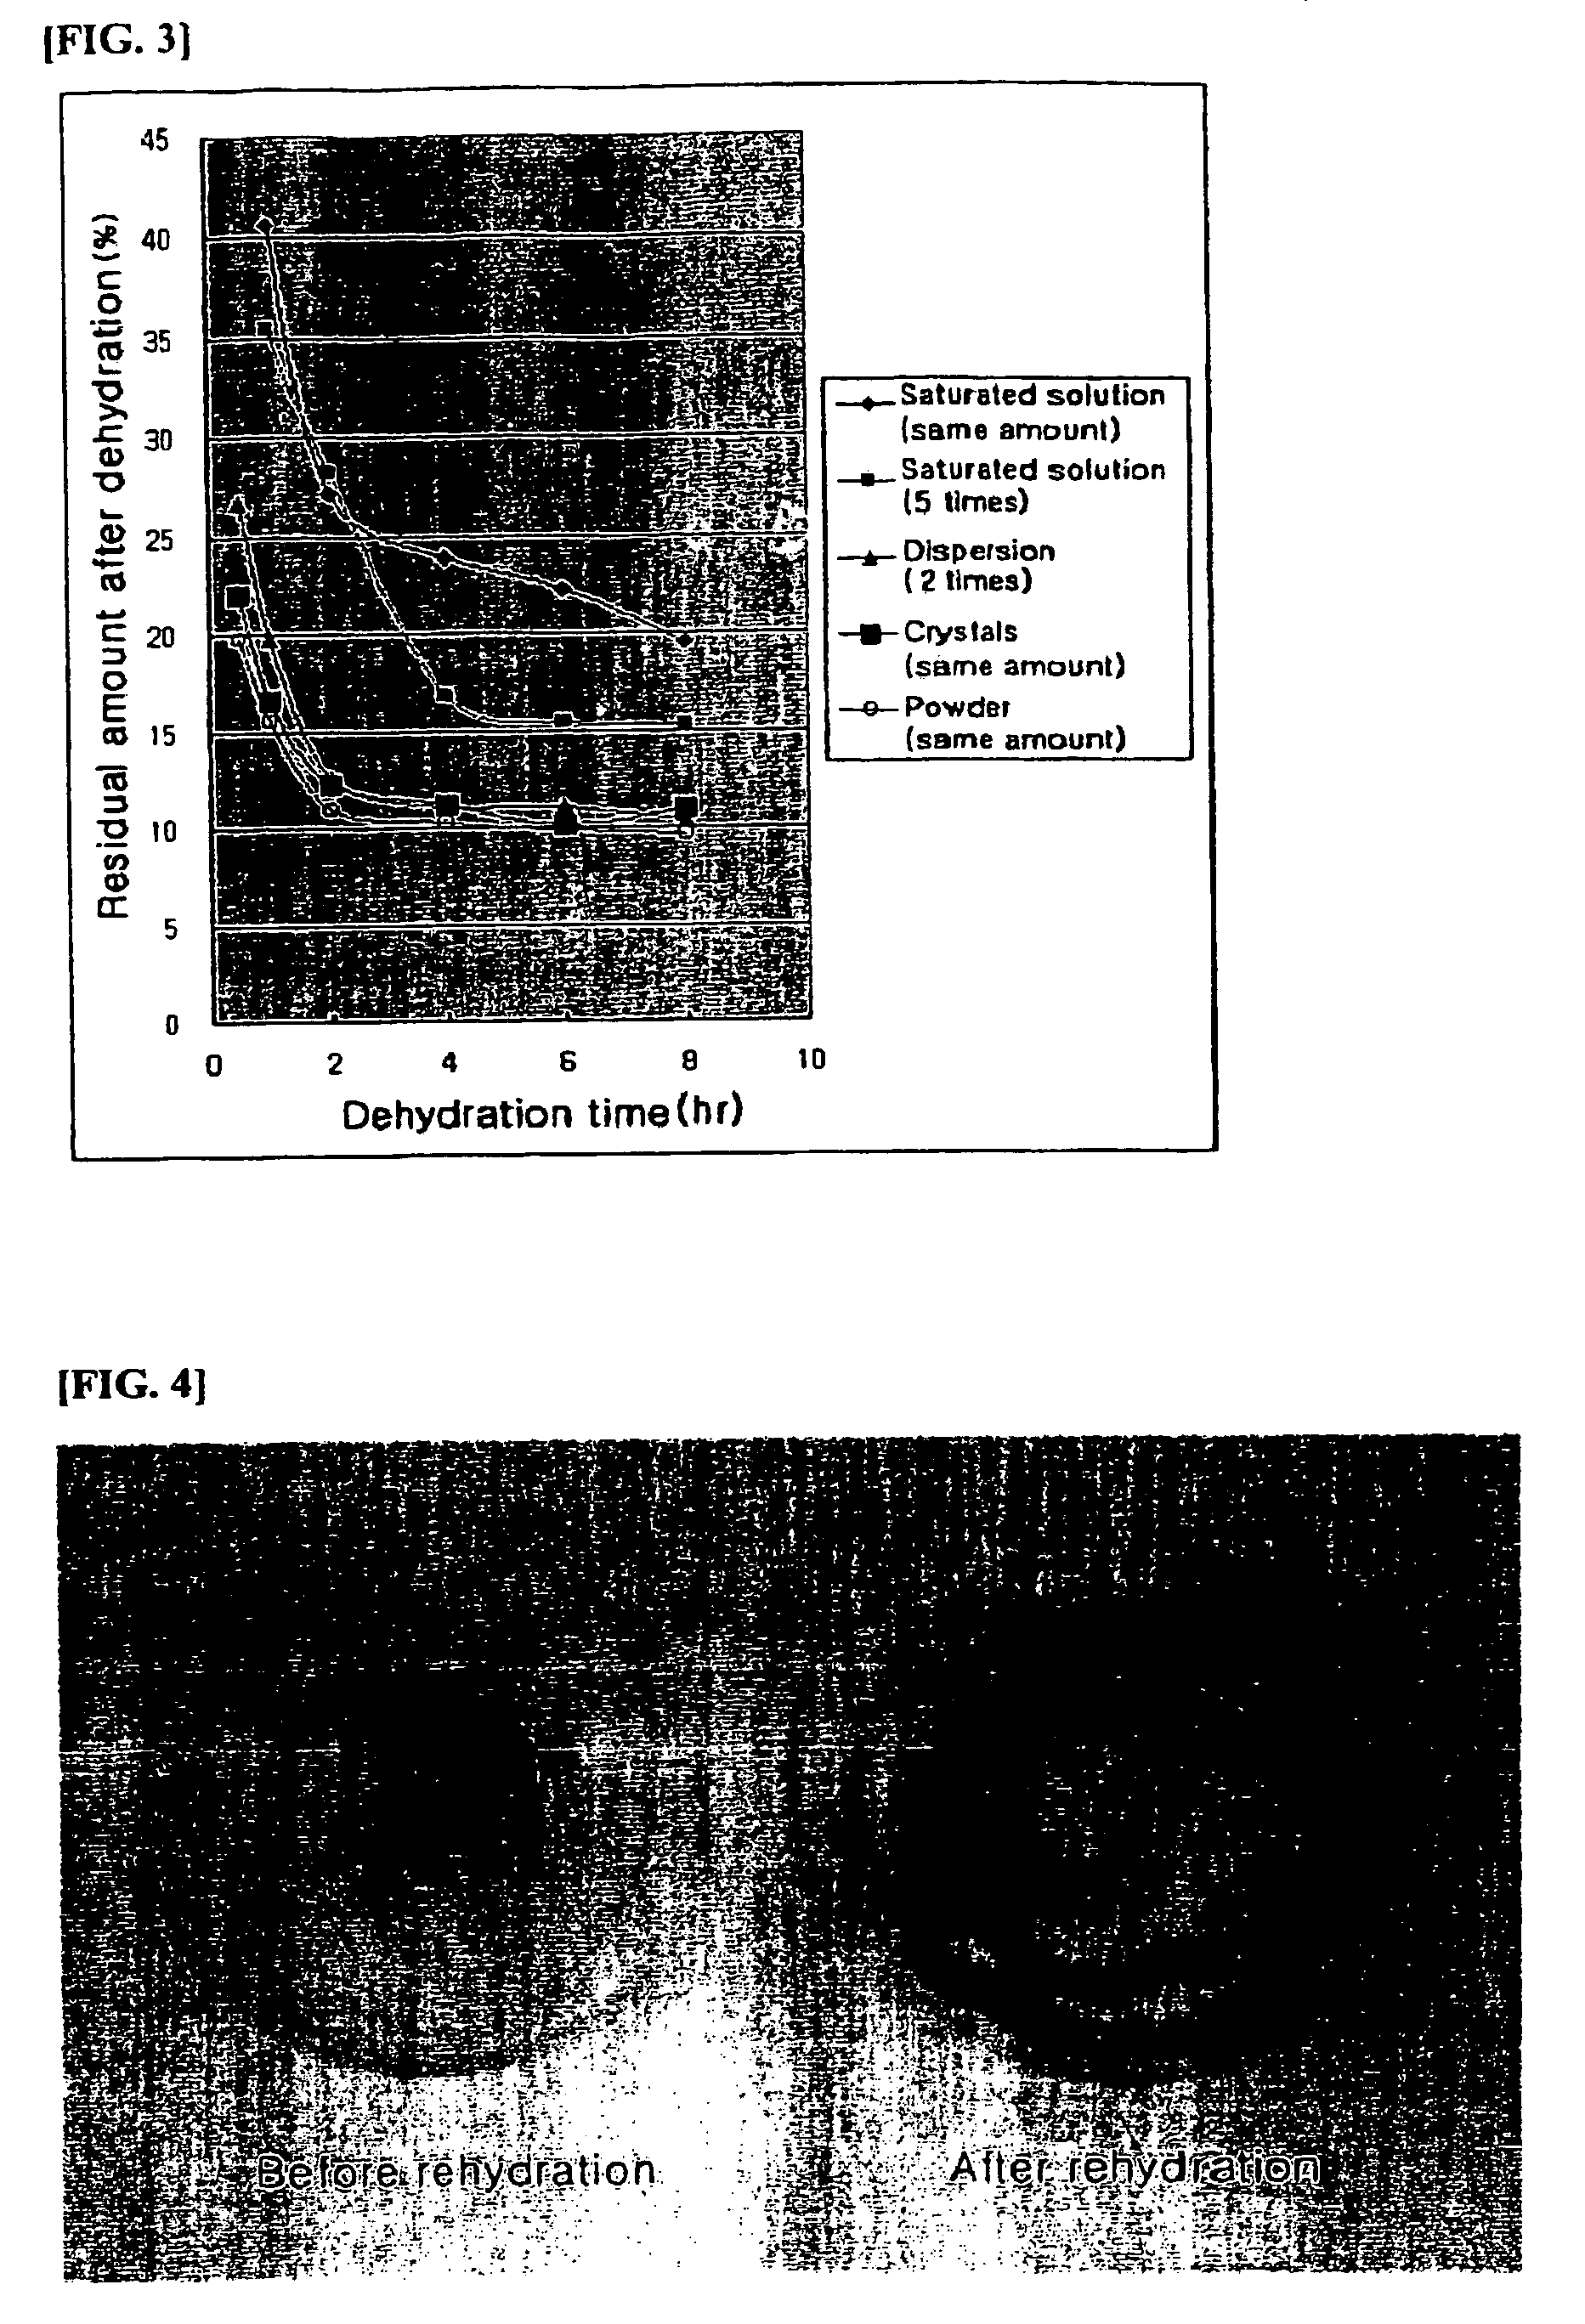 Molecular press dehydration method for vegetative tissue using the solid phase of water soluble polymer substances as a dehydrating agent